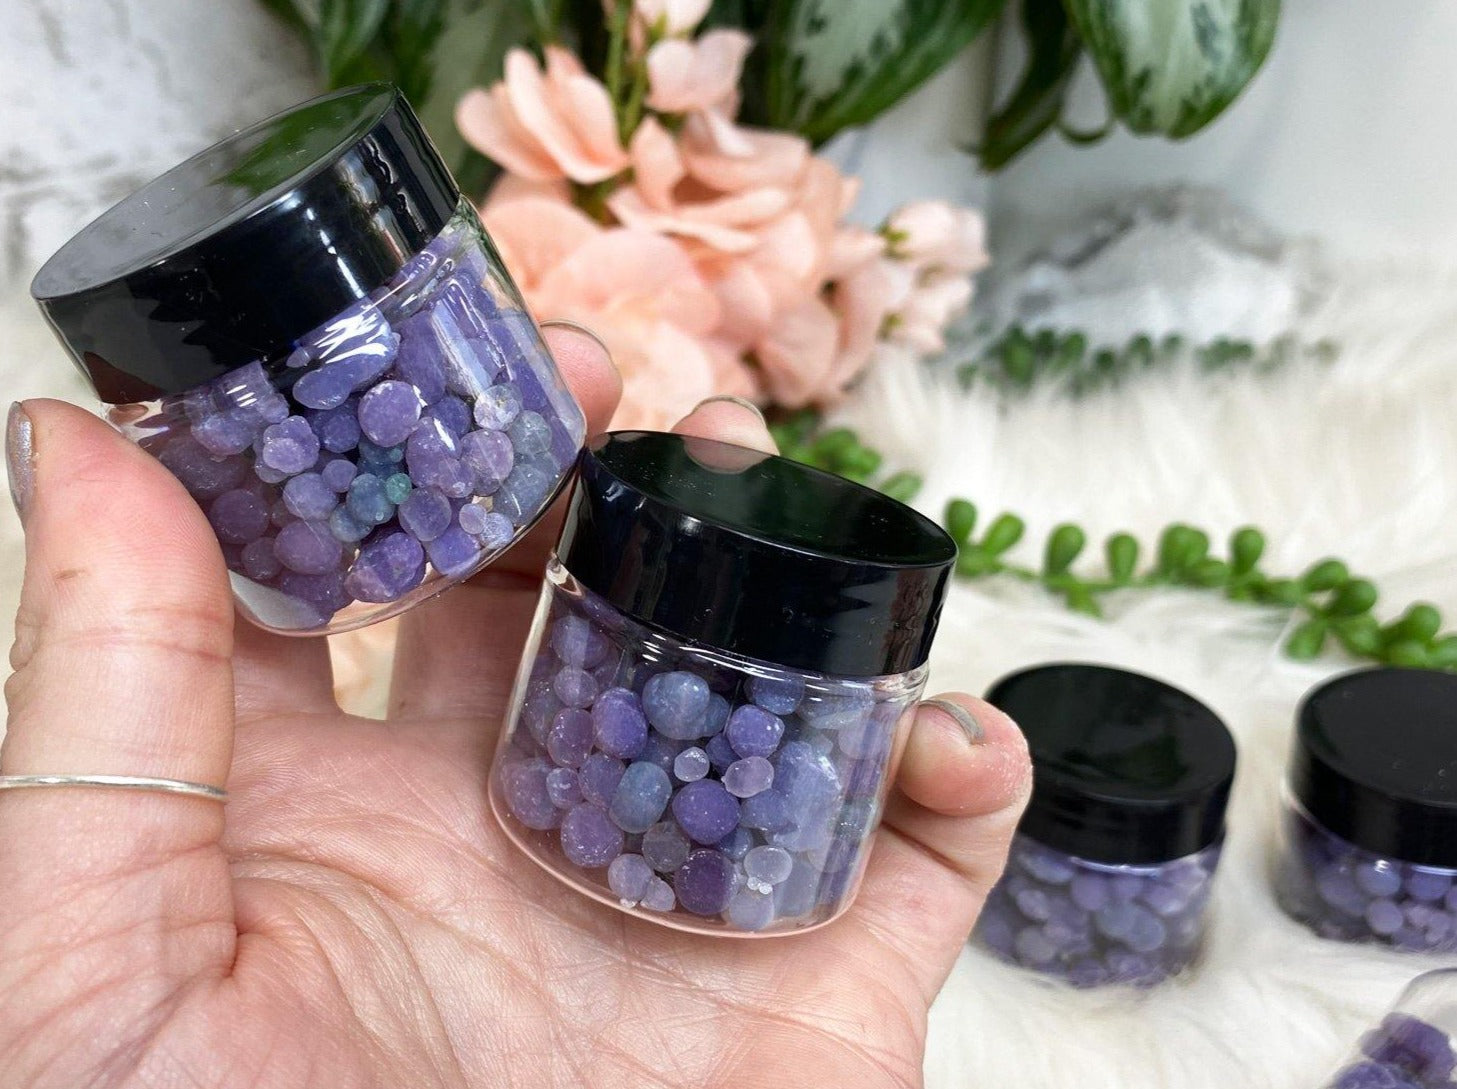 Grape agate jars with small purple chalcedony grape agate crystal balls